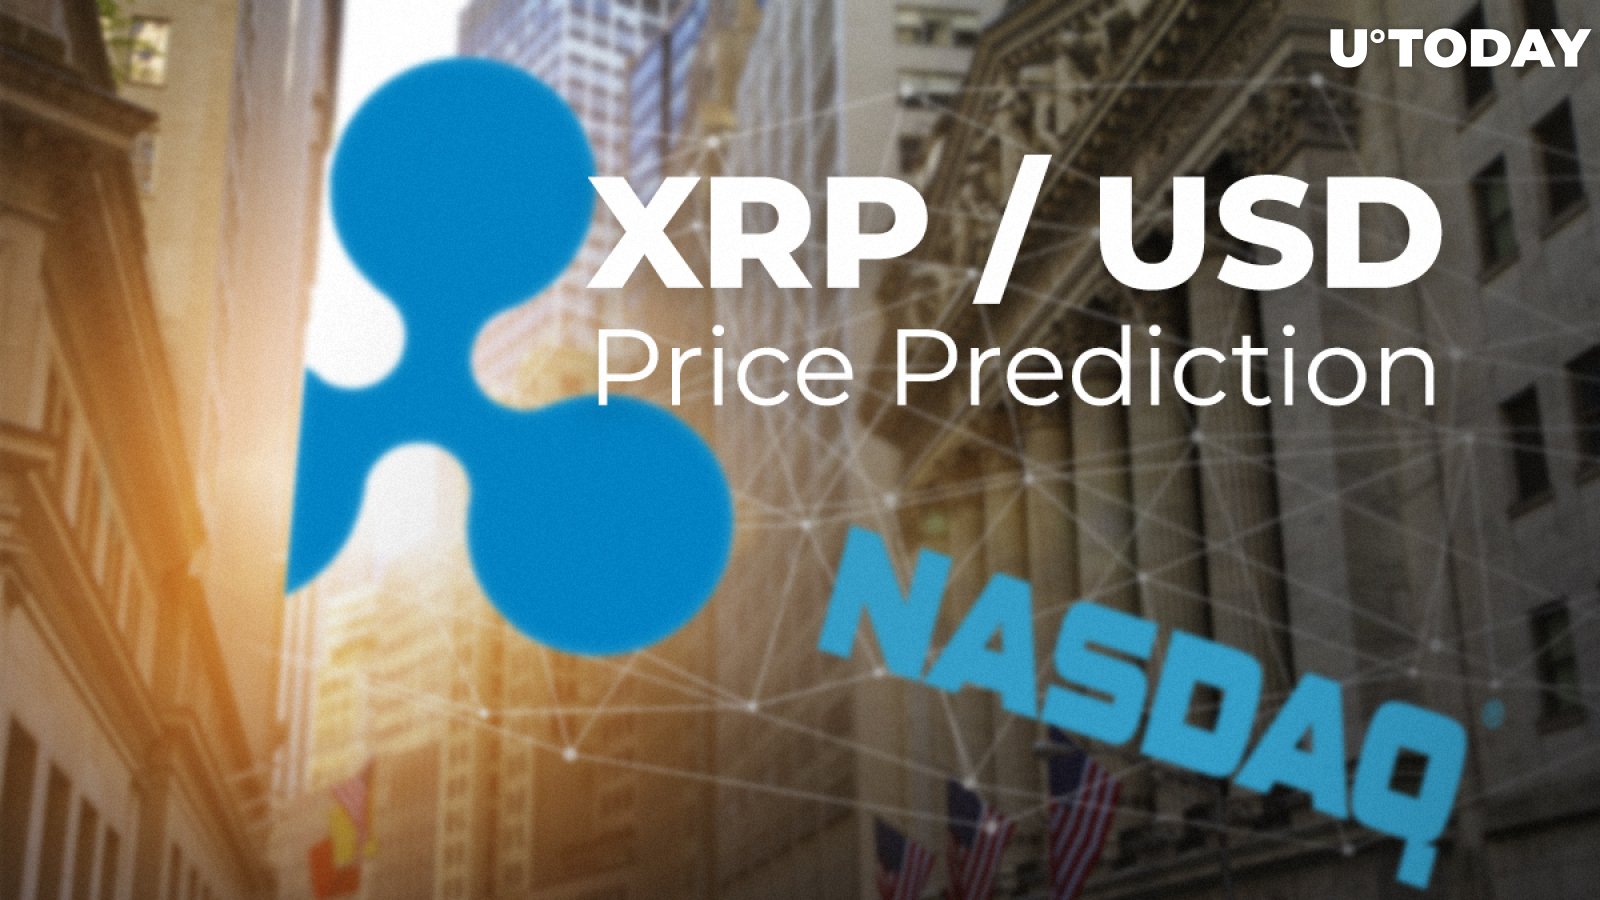 XRP/USD Price Prediction — A Rally Against the News About Nasdaq or Any Other Reason?